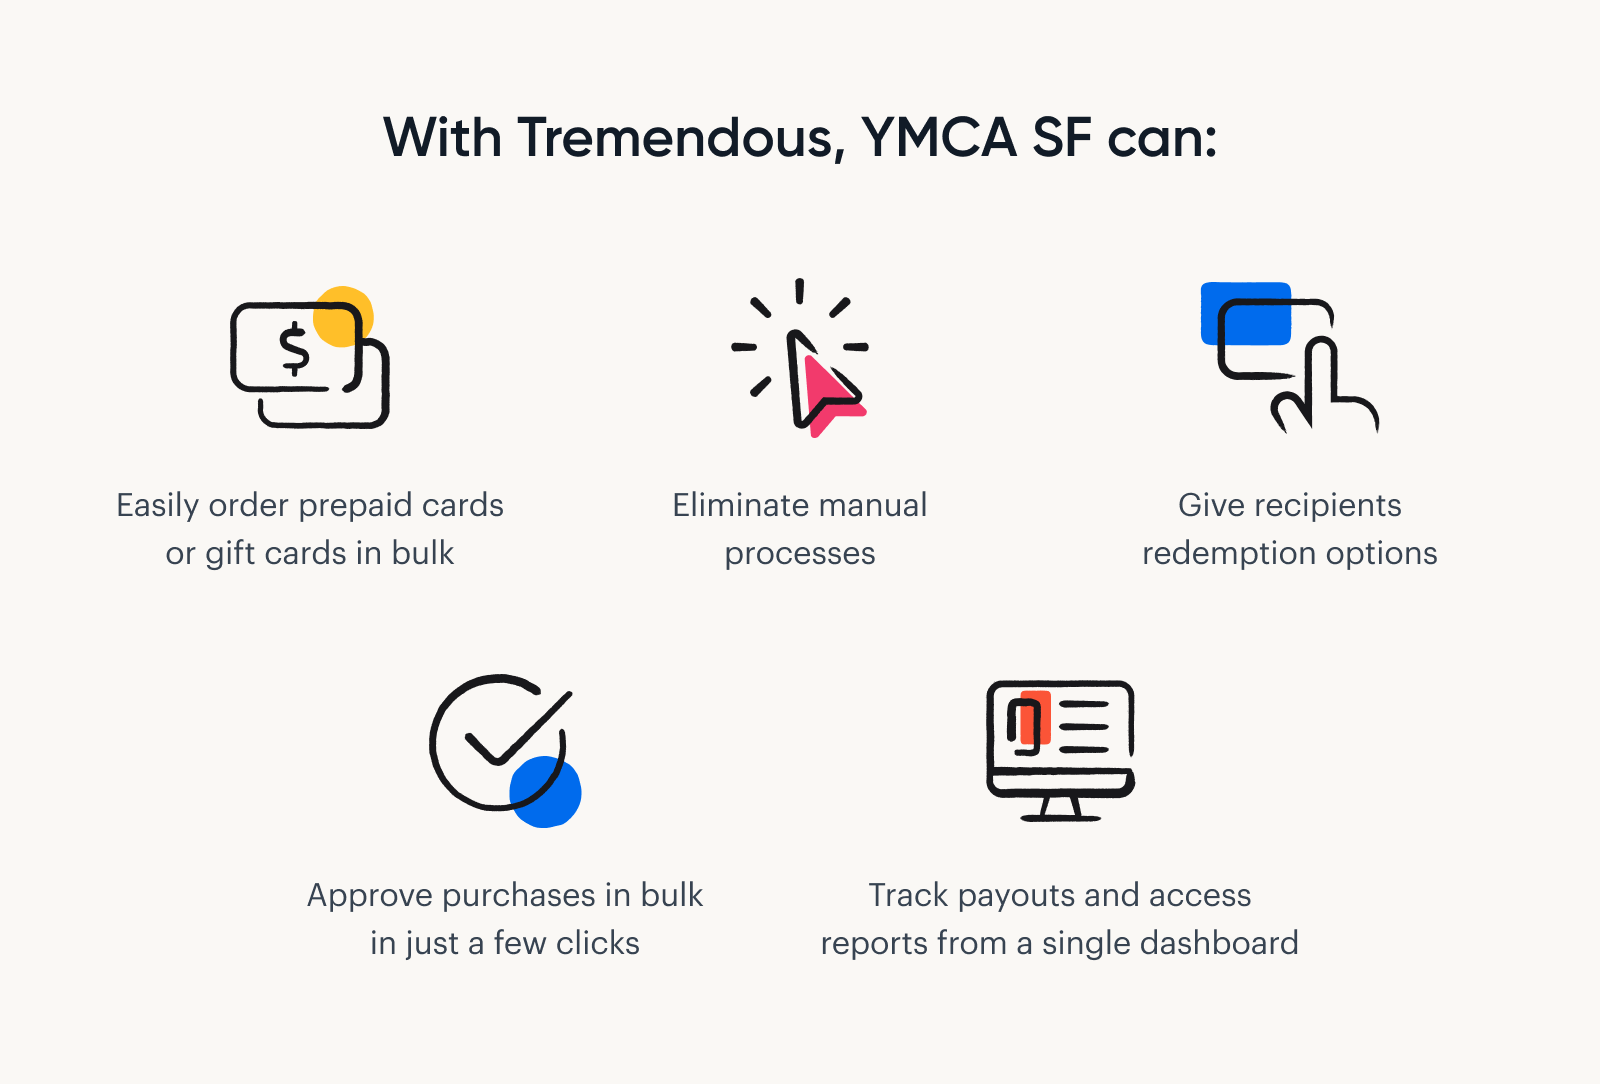 A graphic describing how YMCA sent charitable disbursements faster and more easily with help from Tremendous.